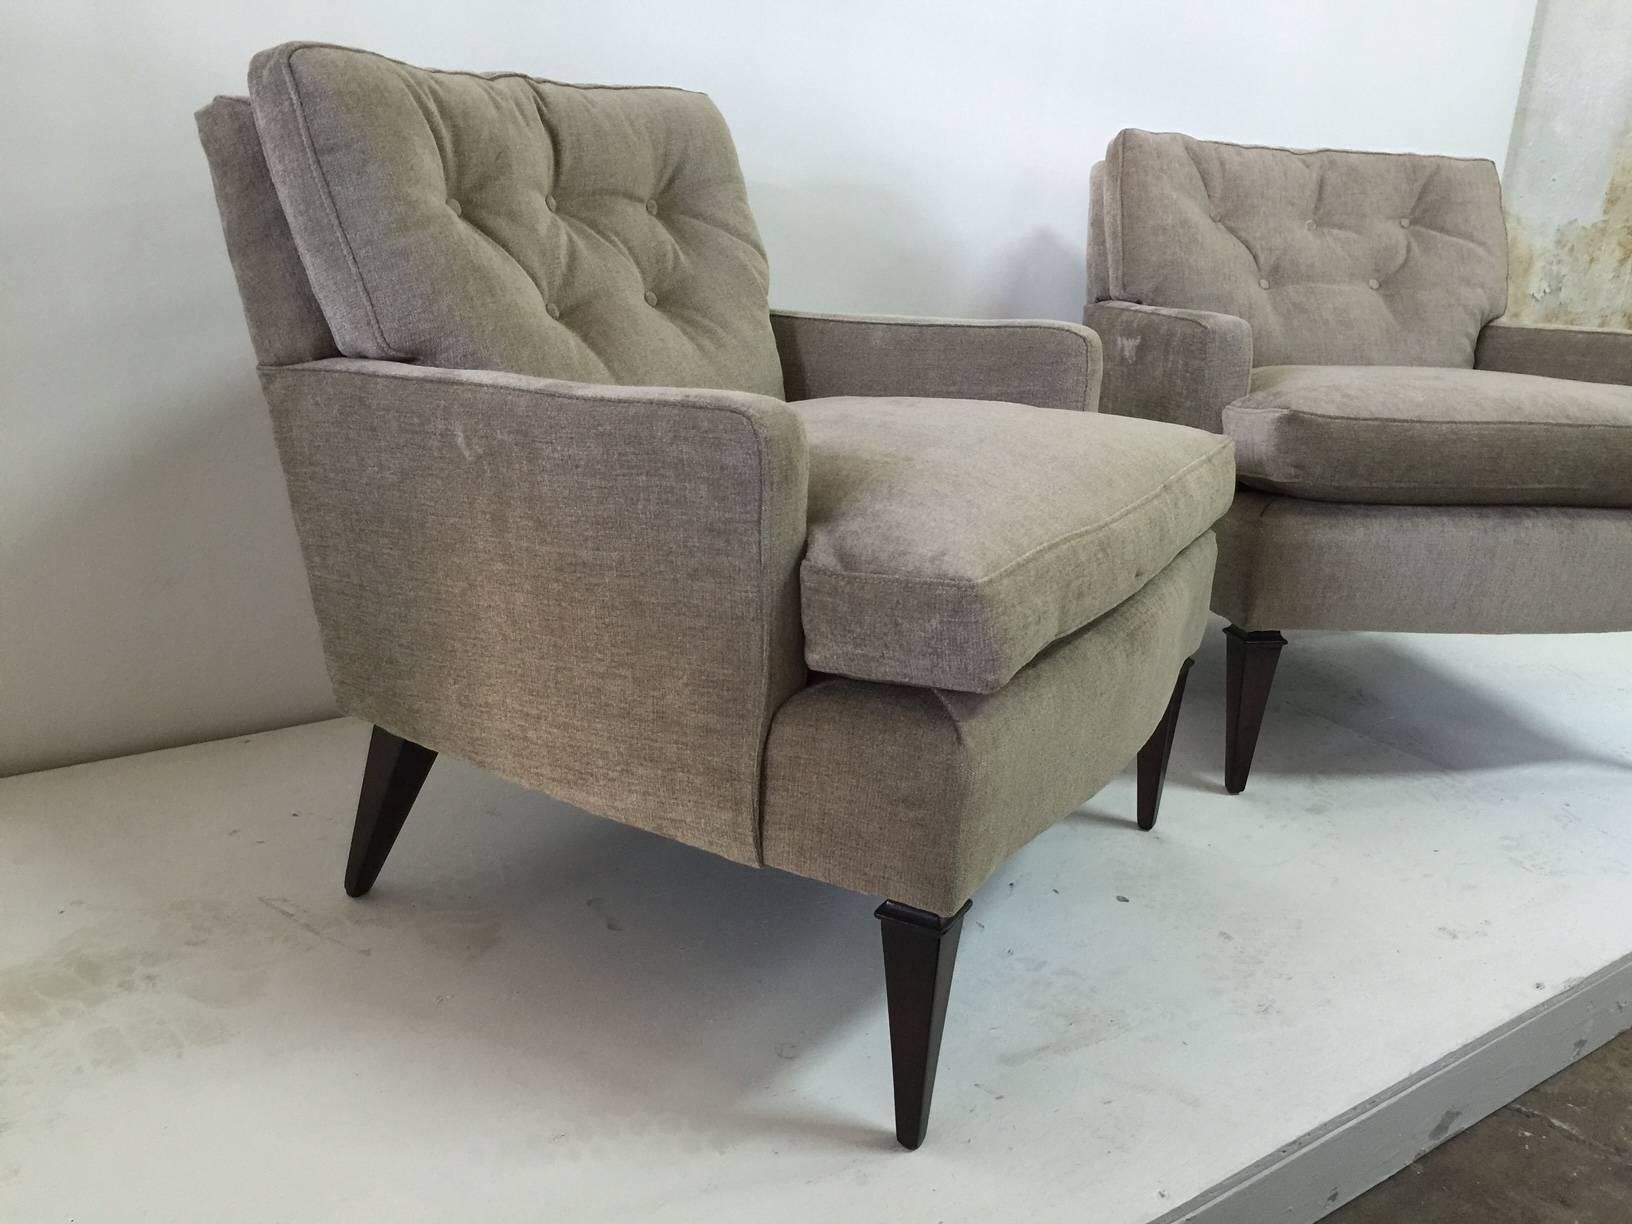 These are a lovely pair of linear and great scale armchairs with beautiful tapering legs lacquered in ebonized finish. Upholstered in taupe finish velvet fabric. These are low chairs but very comfortable.